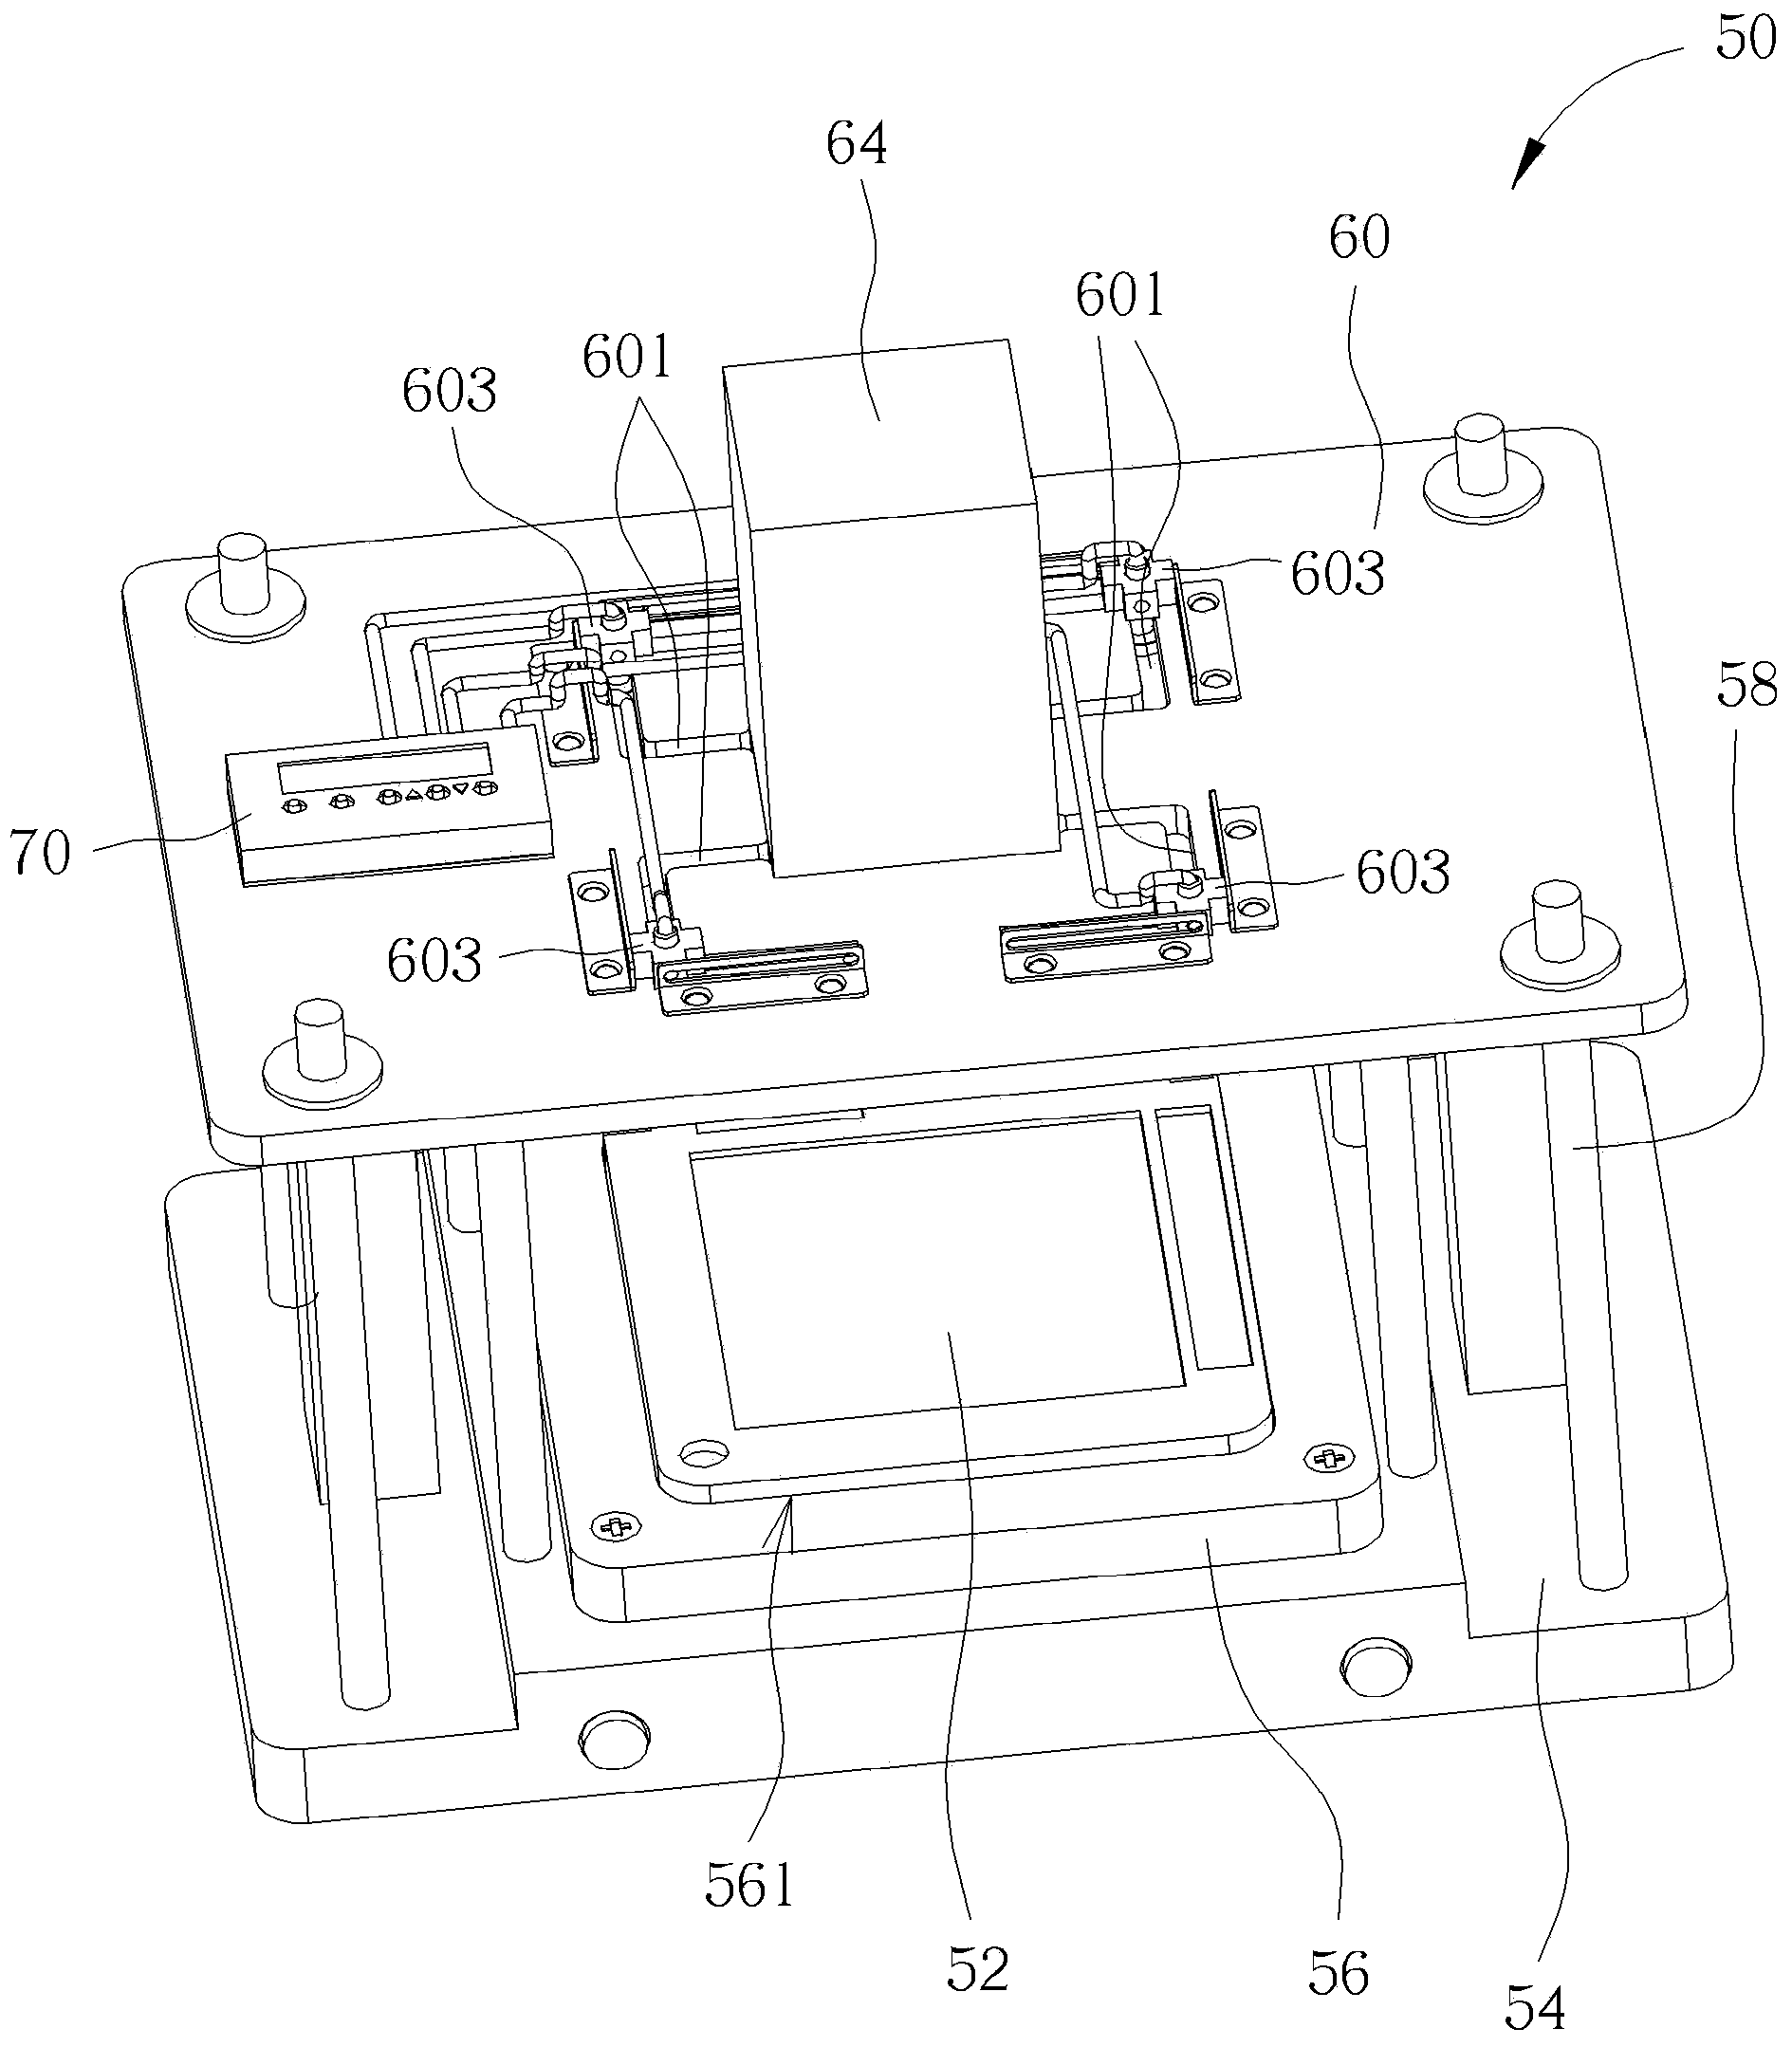 Test device and method for testing whether a workpiece is positioned correctly